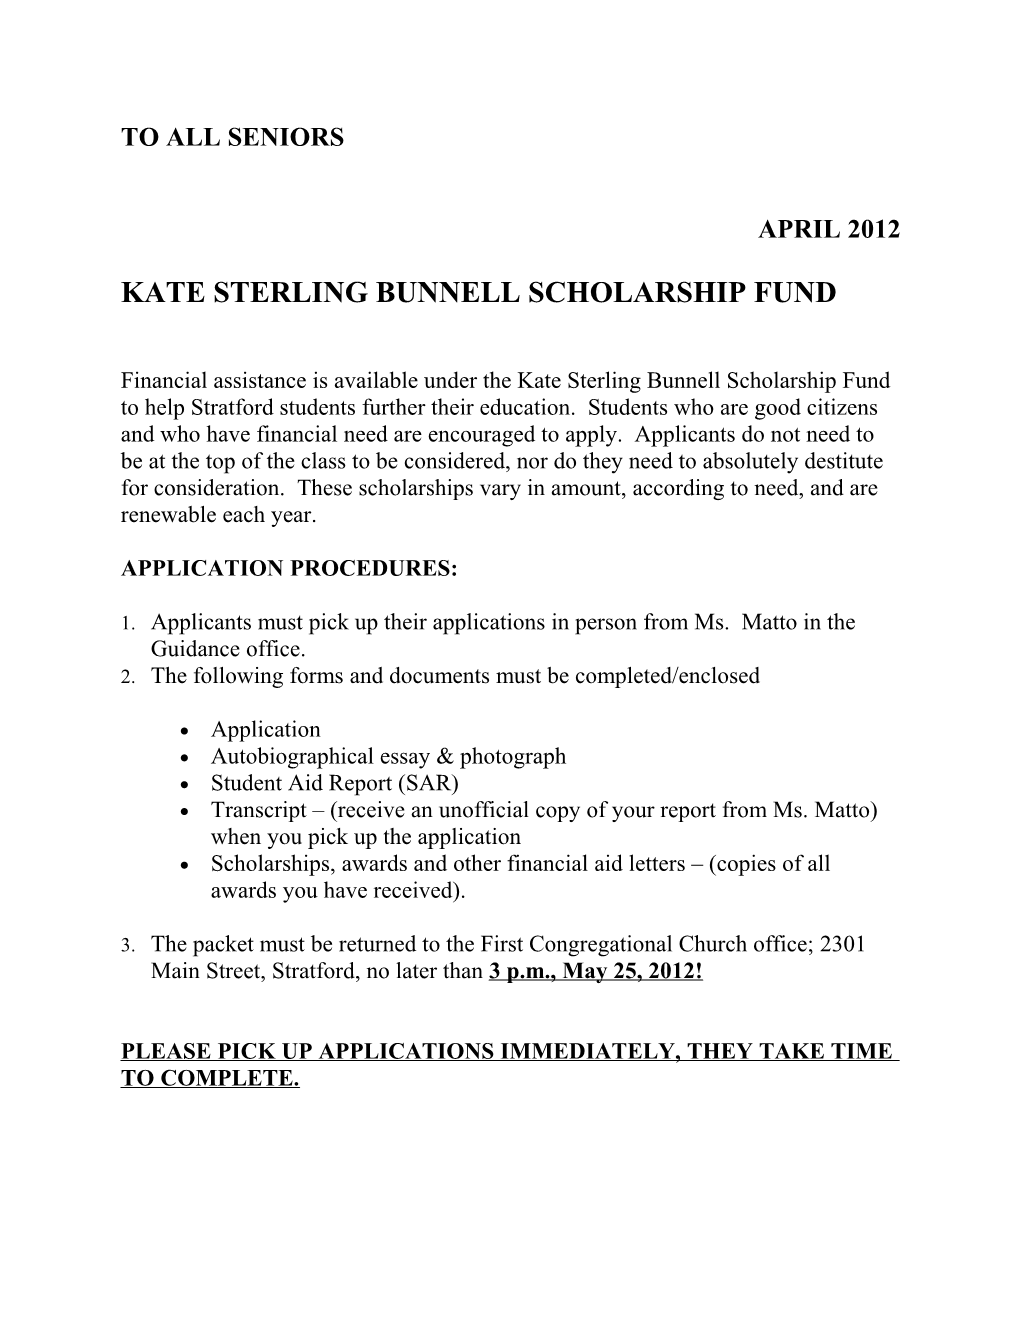 Kate Sterling Bunnell Scholarship Fund